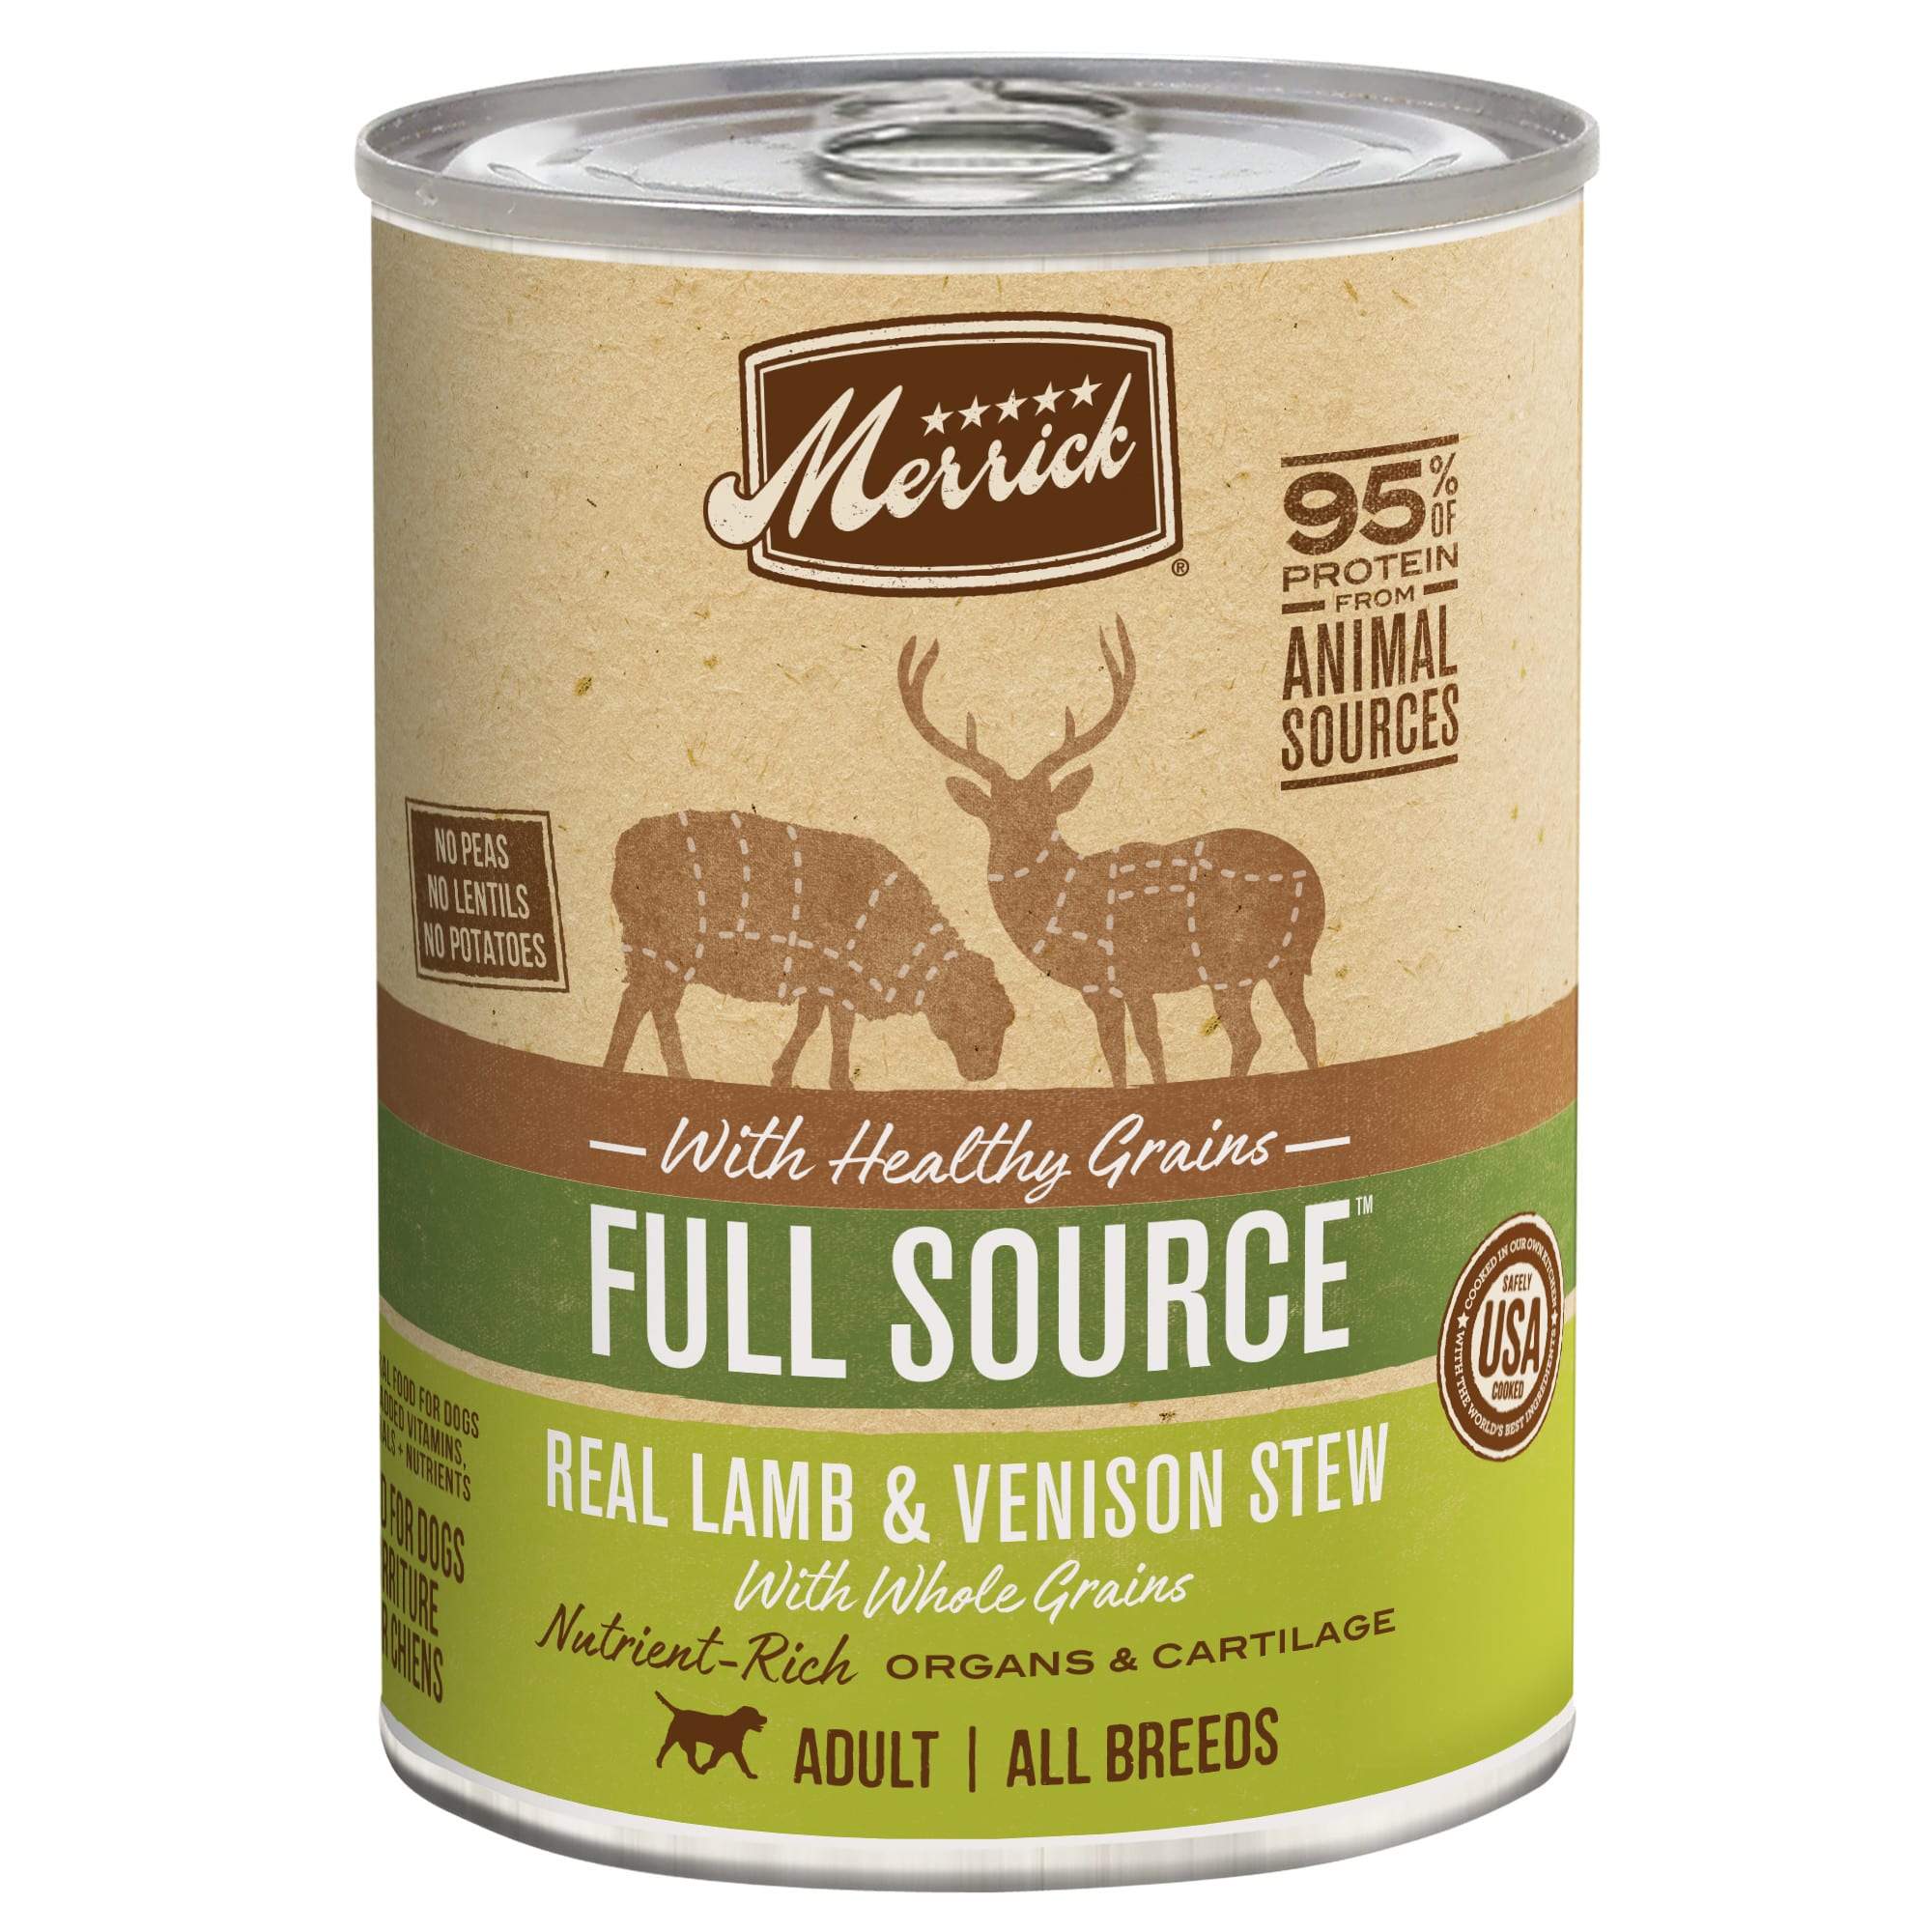 Merrick Full Source Healthy Grains Lamb and Venison Recipe Wet Canned Dog Food - 12/12.7 oz Cans - Case of 12  